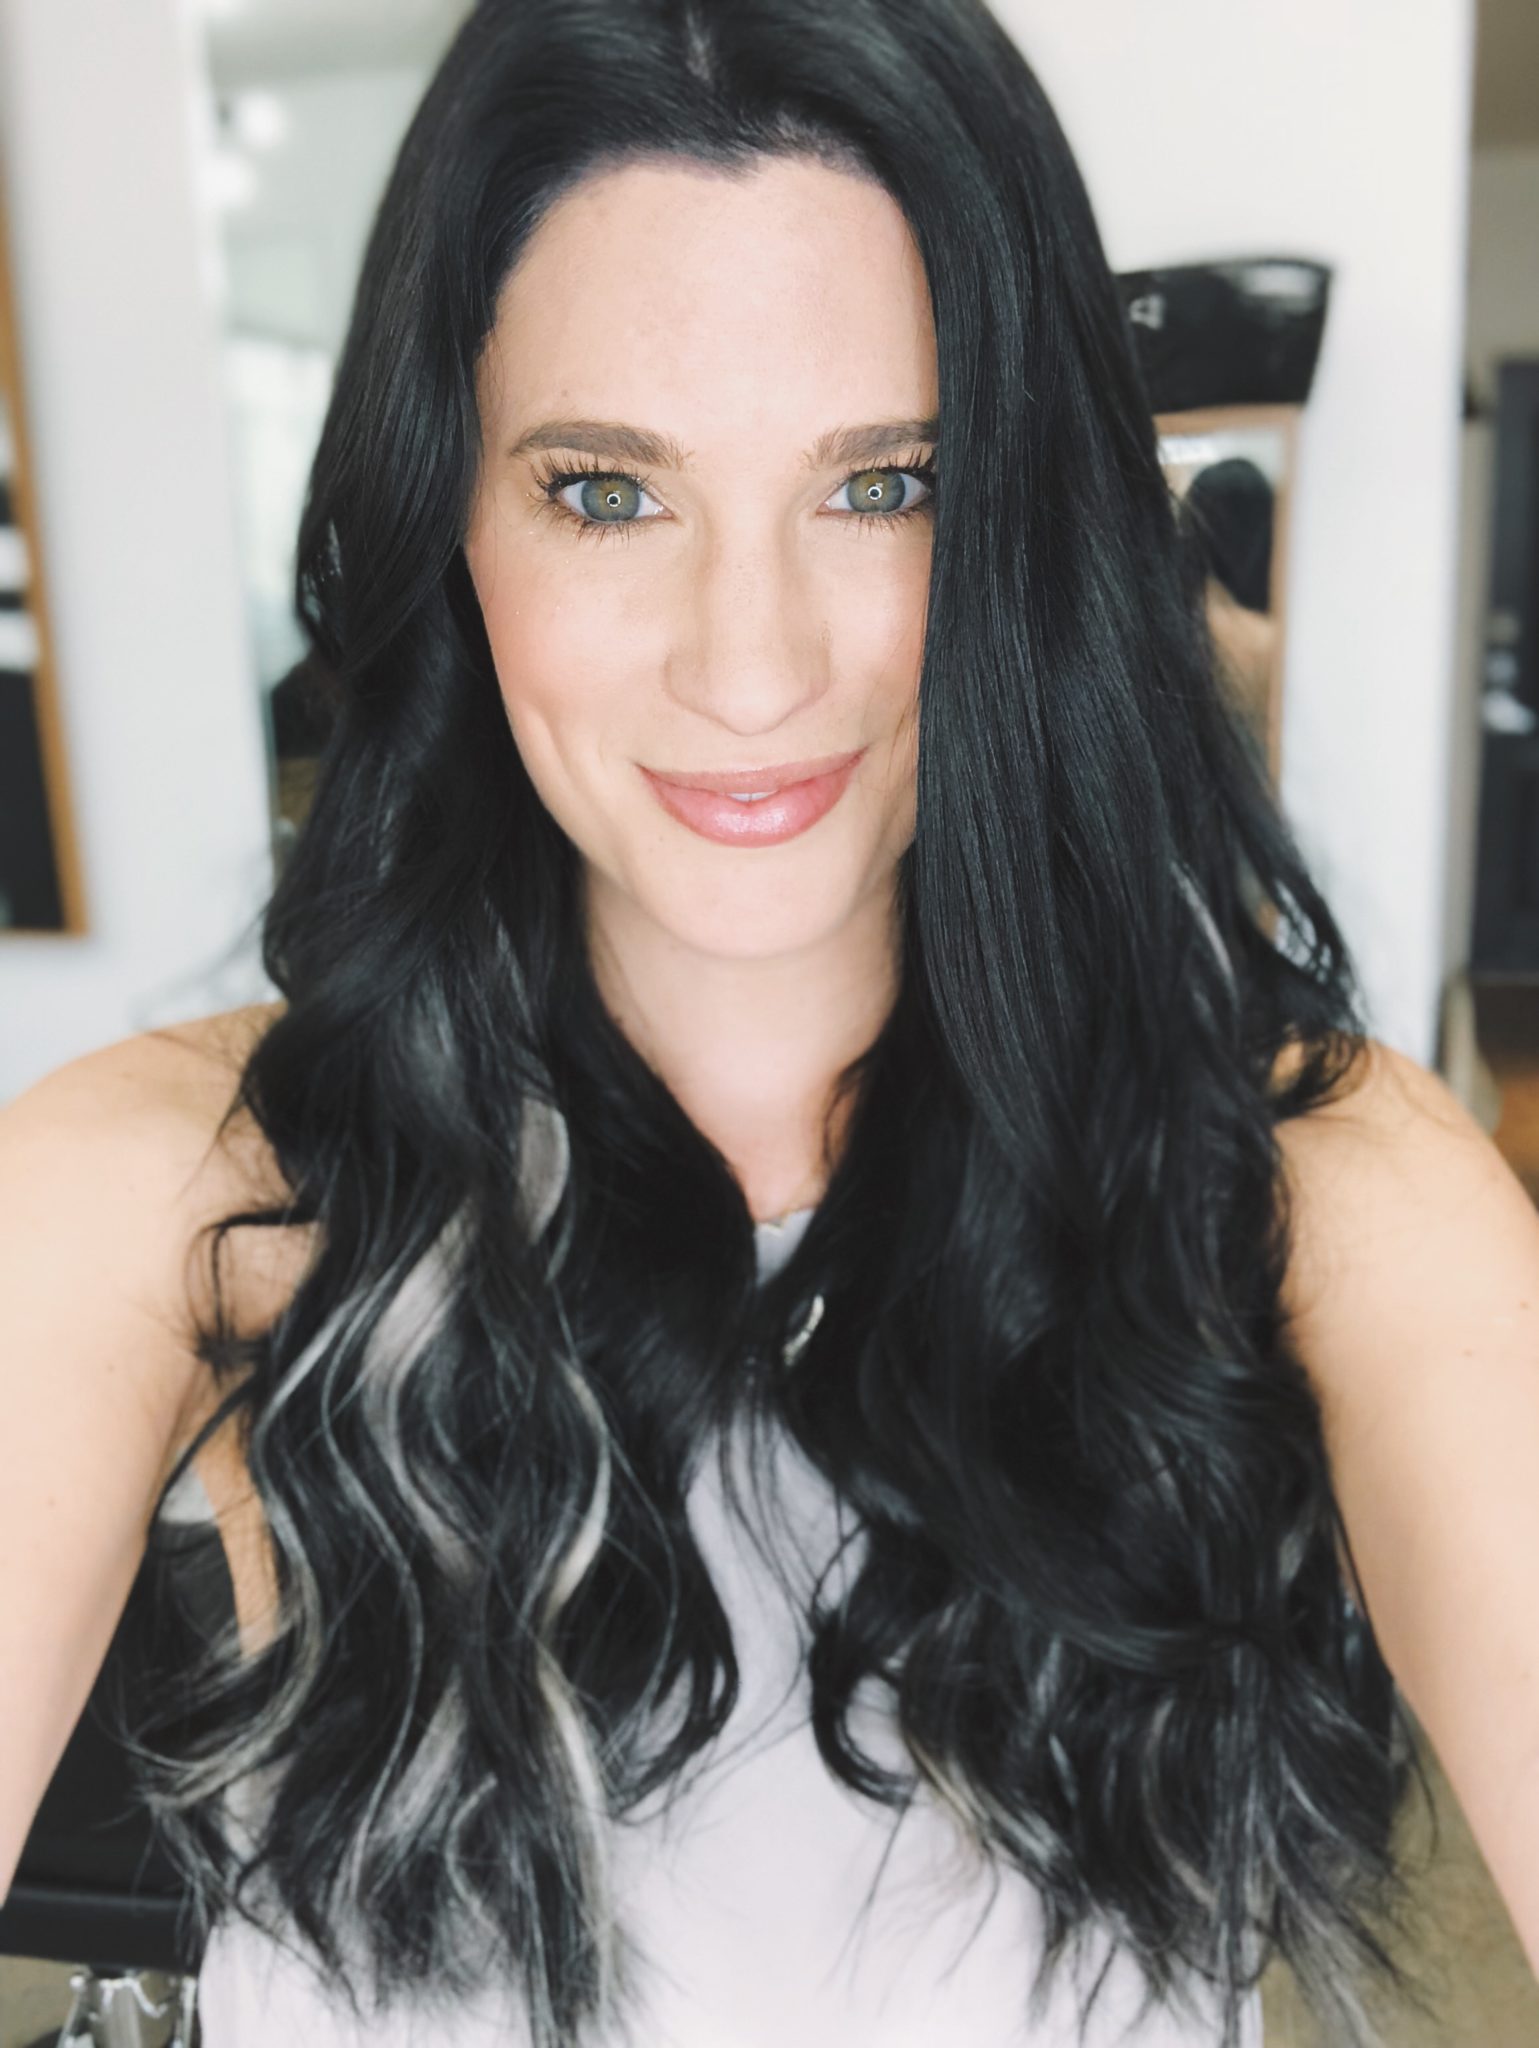 DTKAustin shares how to achieve different types of curls and waves with the T3 Convertible Interchangeable Curling Iron. - T3 Convertible Interchangeable Curling Wand Tutorial by popular Austin style blogger Dressed to Kill